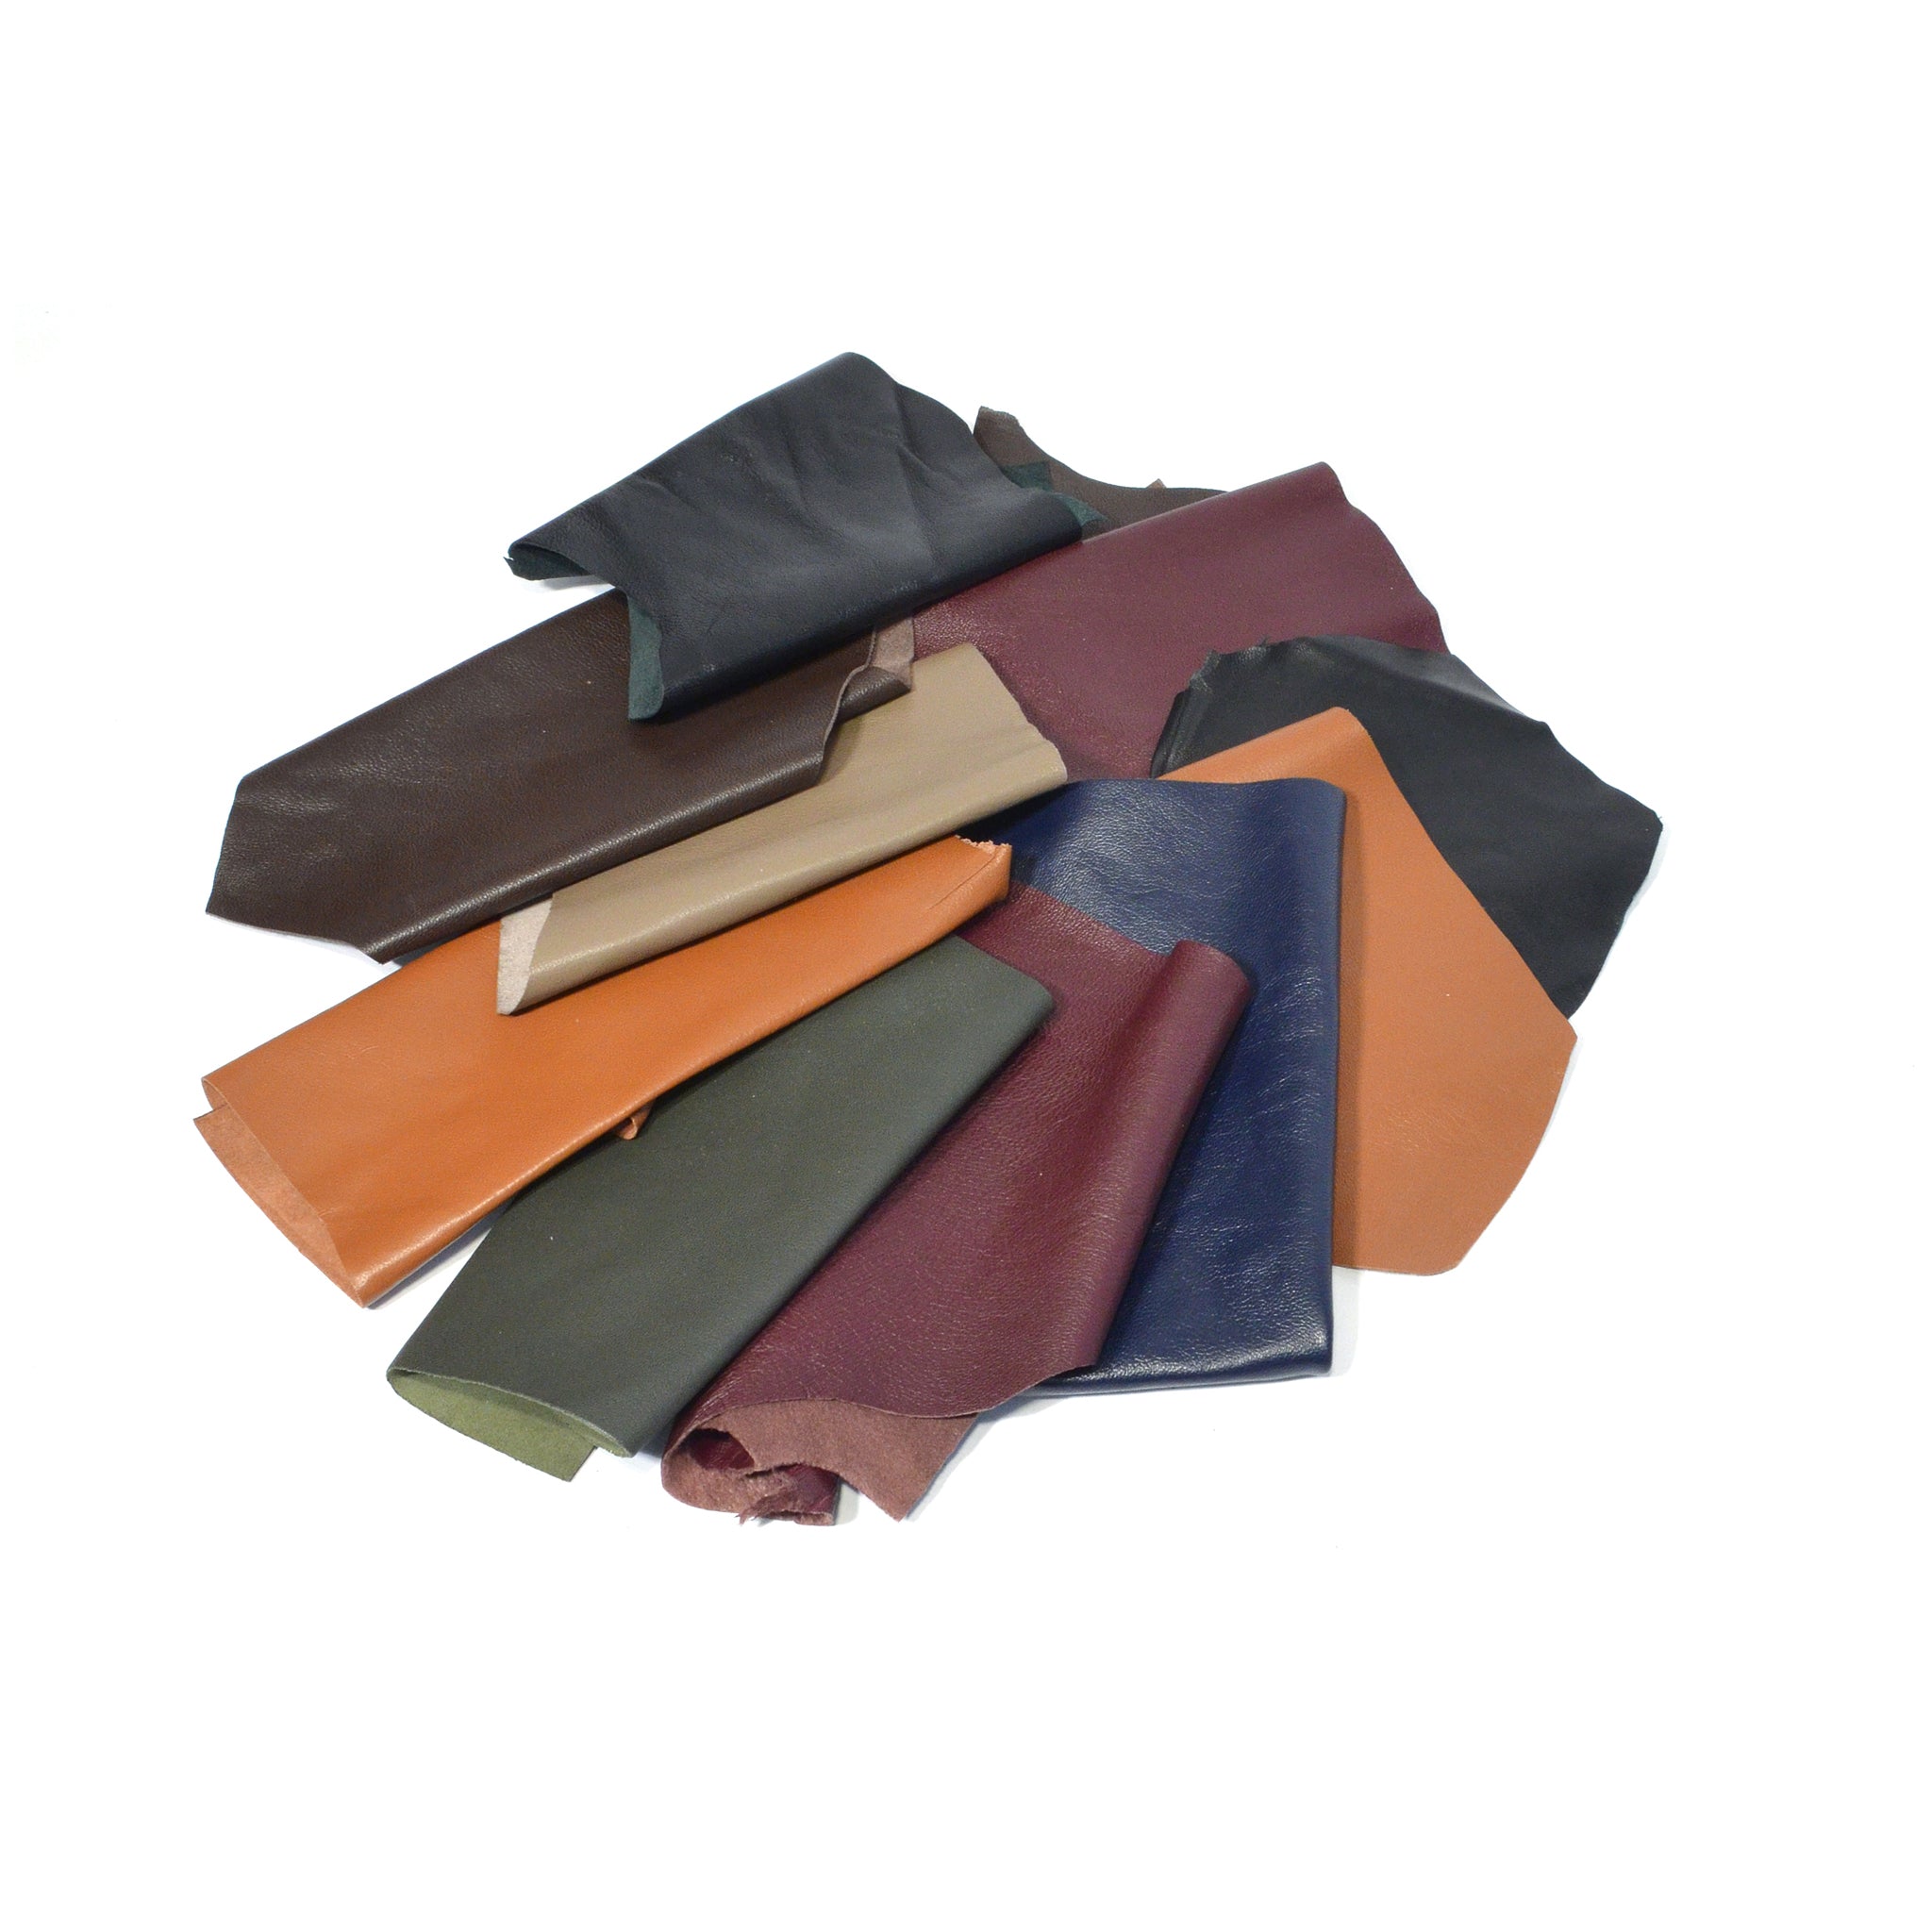 Soft Lamb Sheepskin Leather Pieces - Darks from Identity Leathercraft, suitable for applique, patchwork, mixed media, jewelery and other crafts.